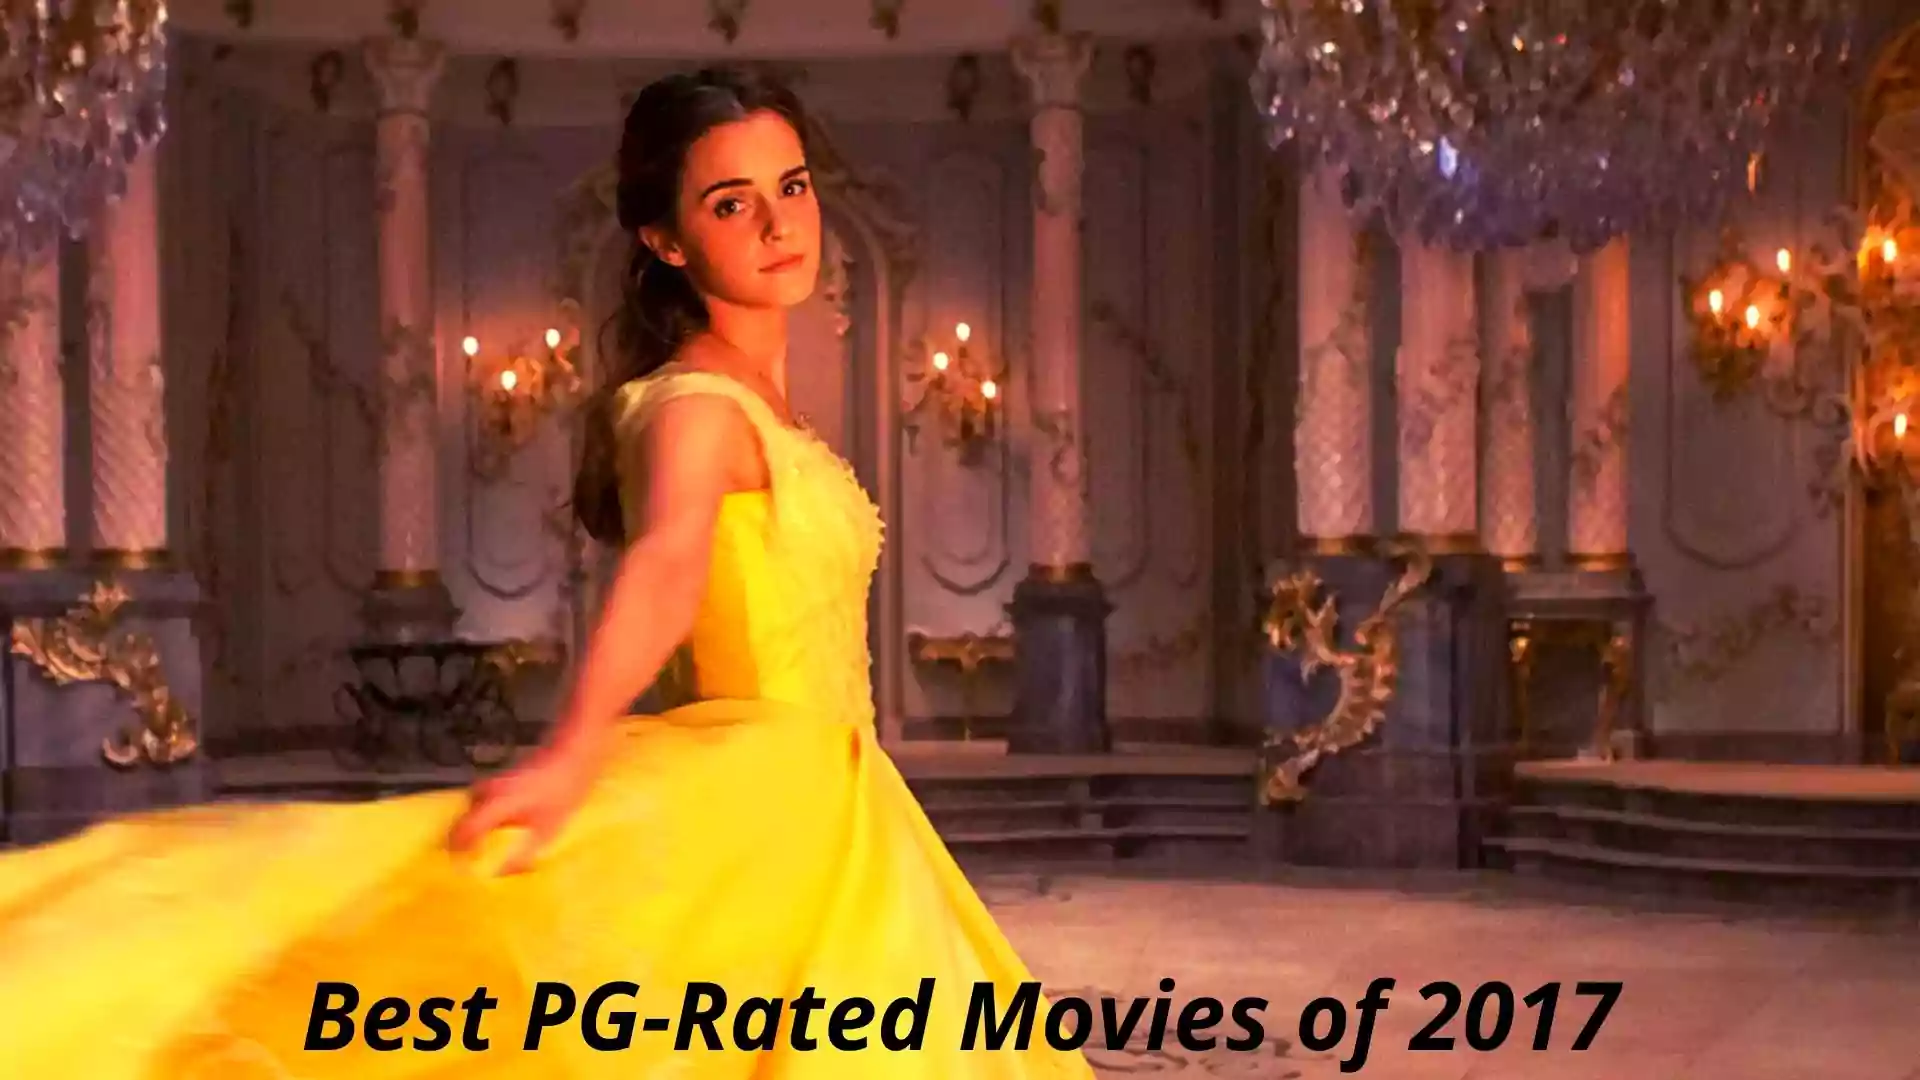 Best PG-Rated Movies of 2017